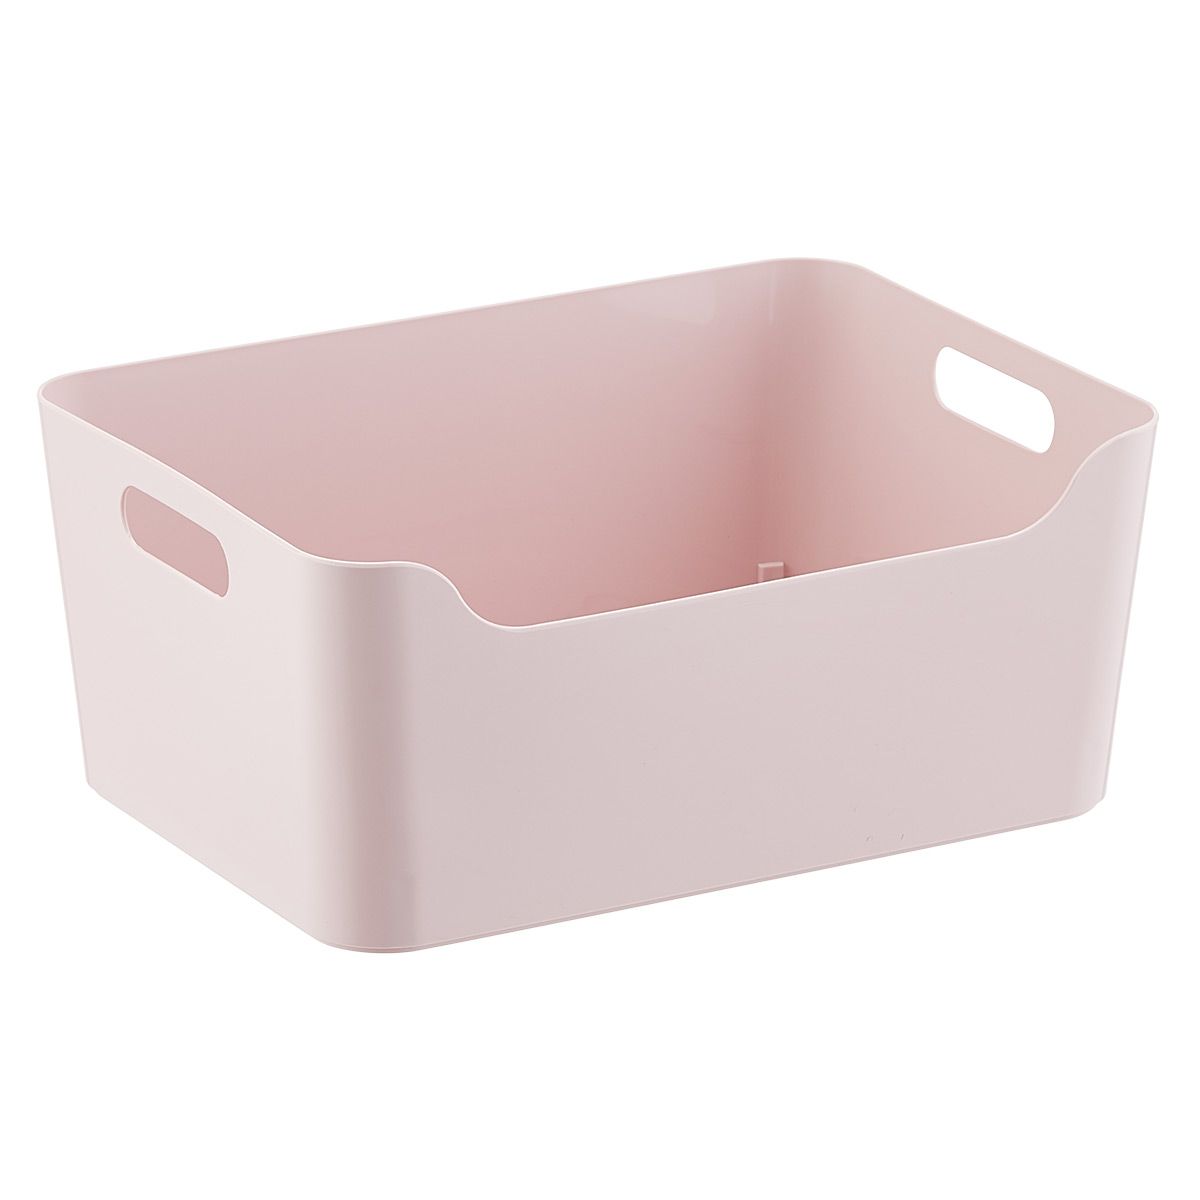 Soft Pink Plastic Storage Bins with Handles | The Container Store